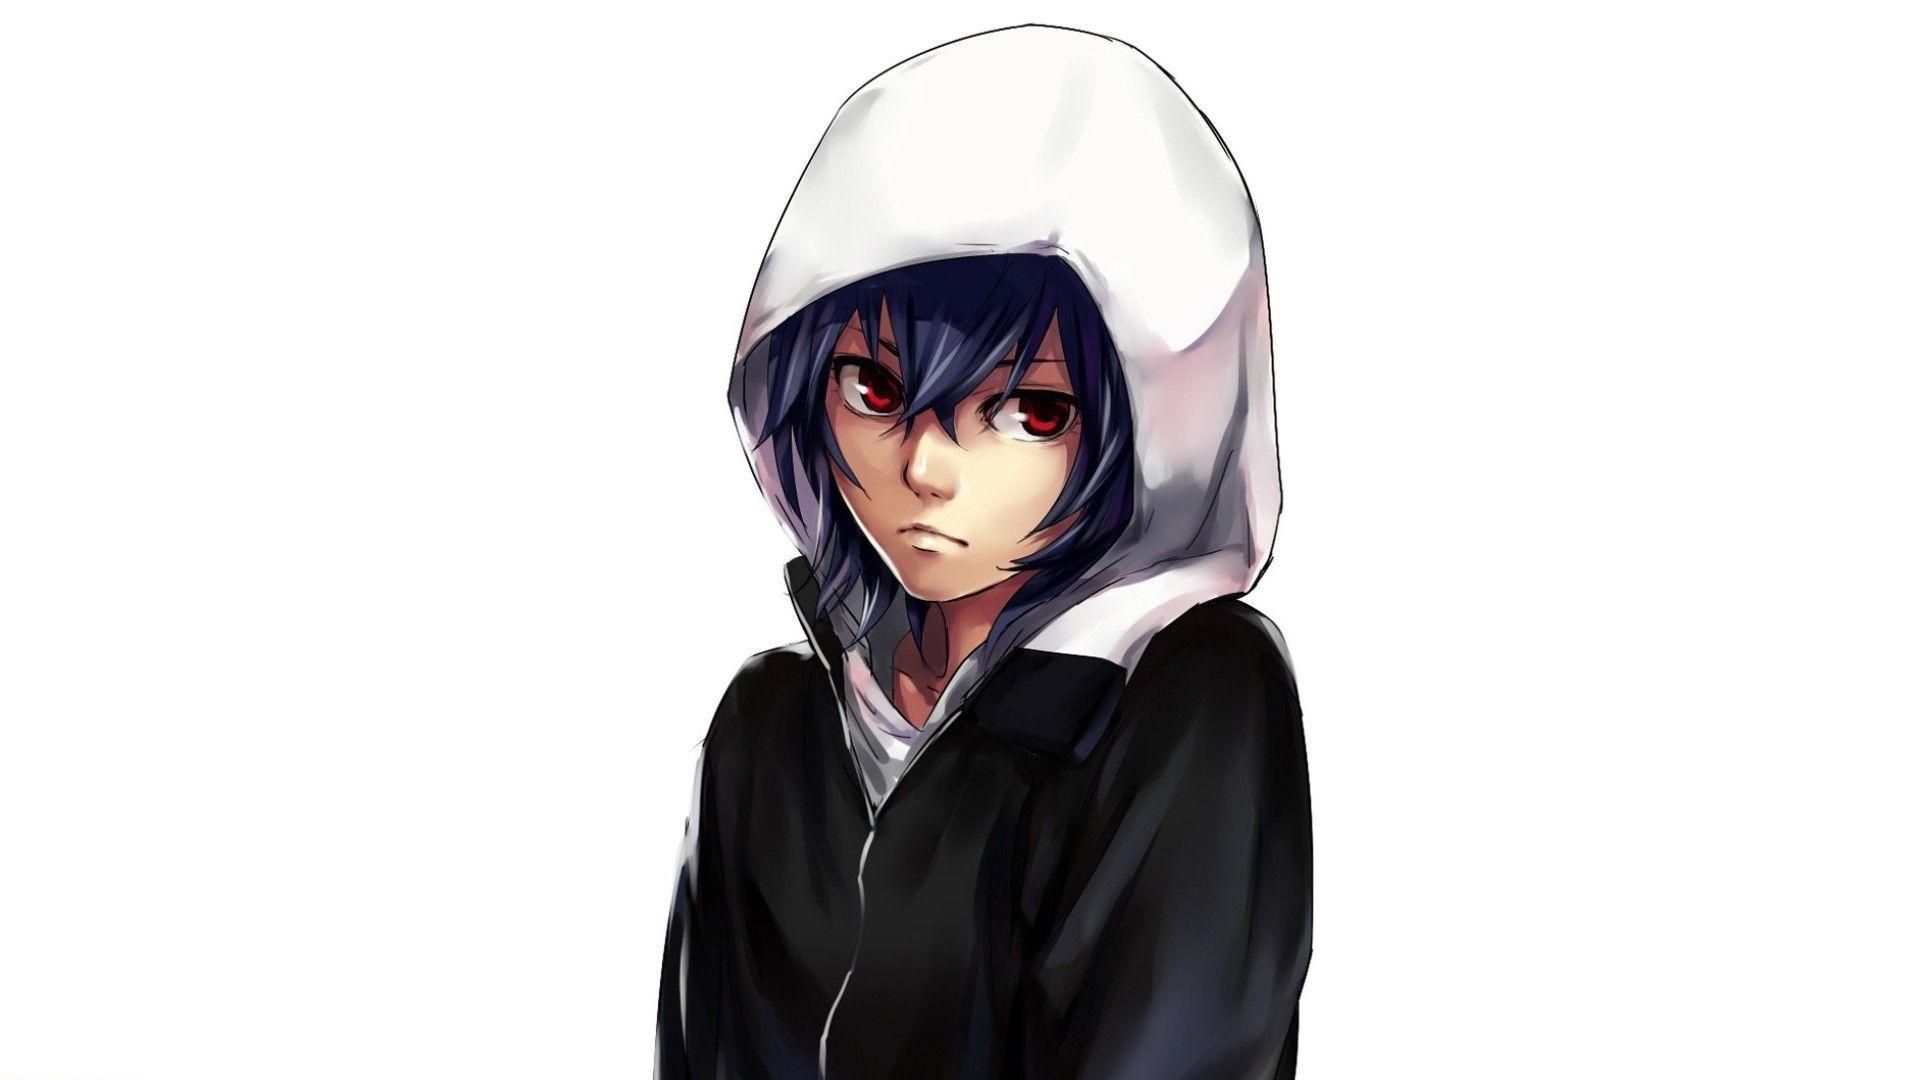 Download Anime Hooded Guy Art Wallpapers - Wallpaper Cave